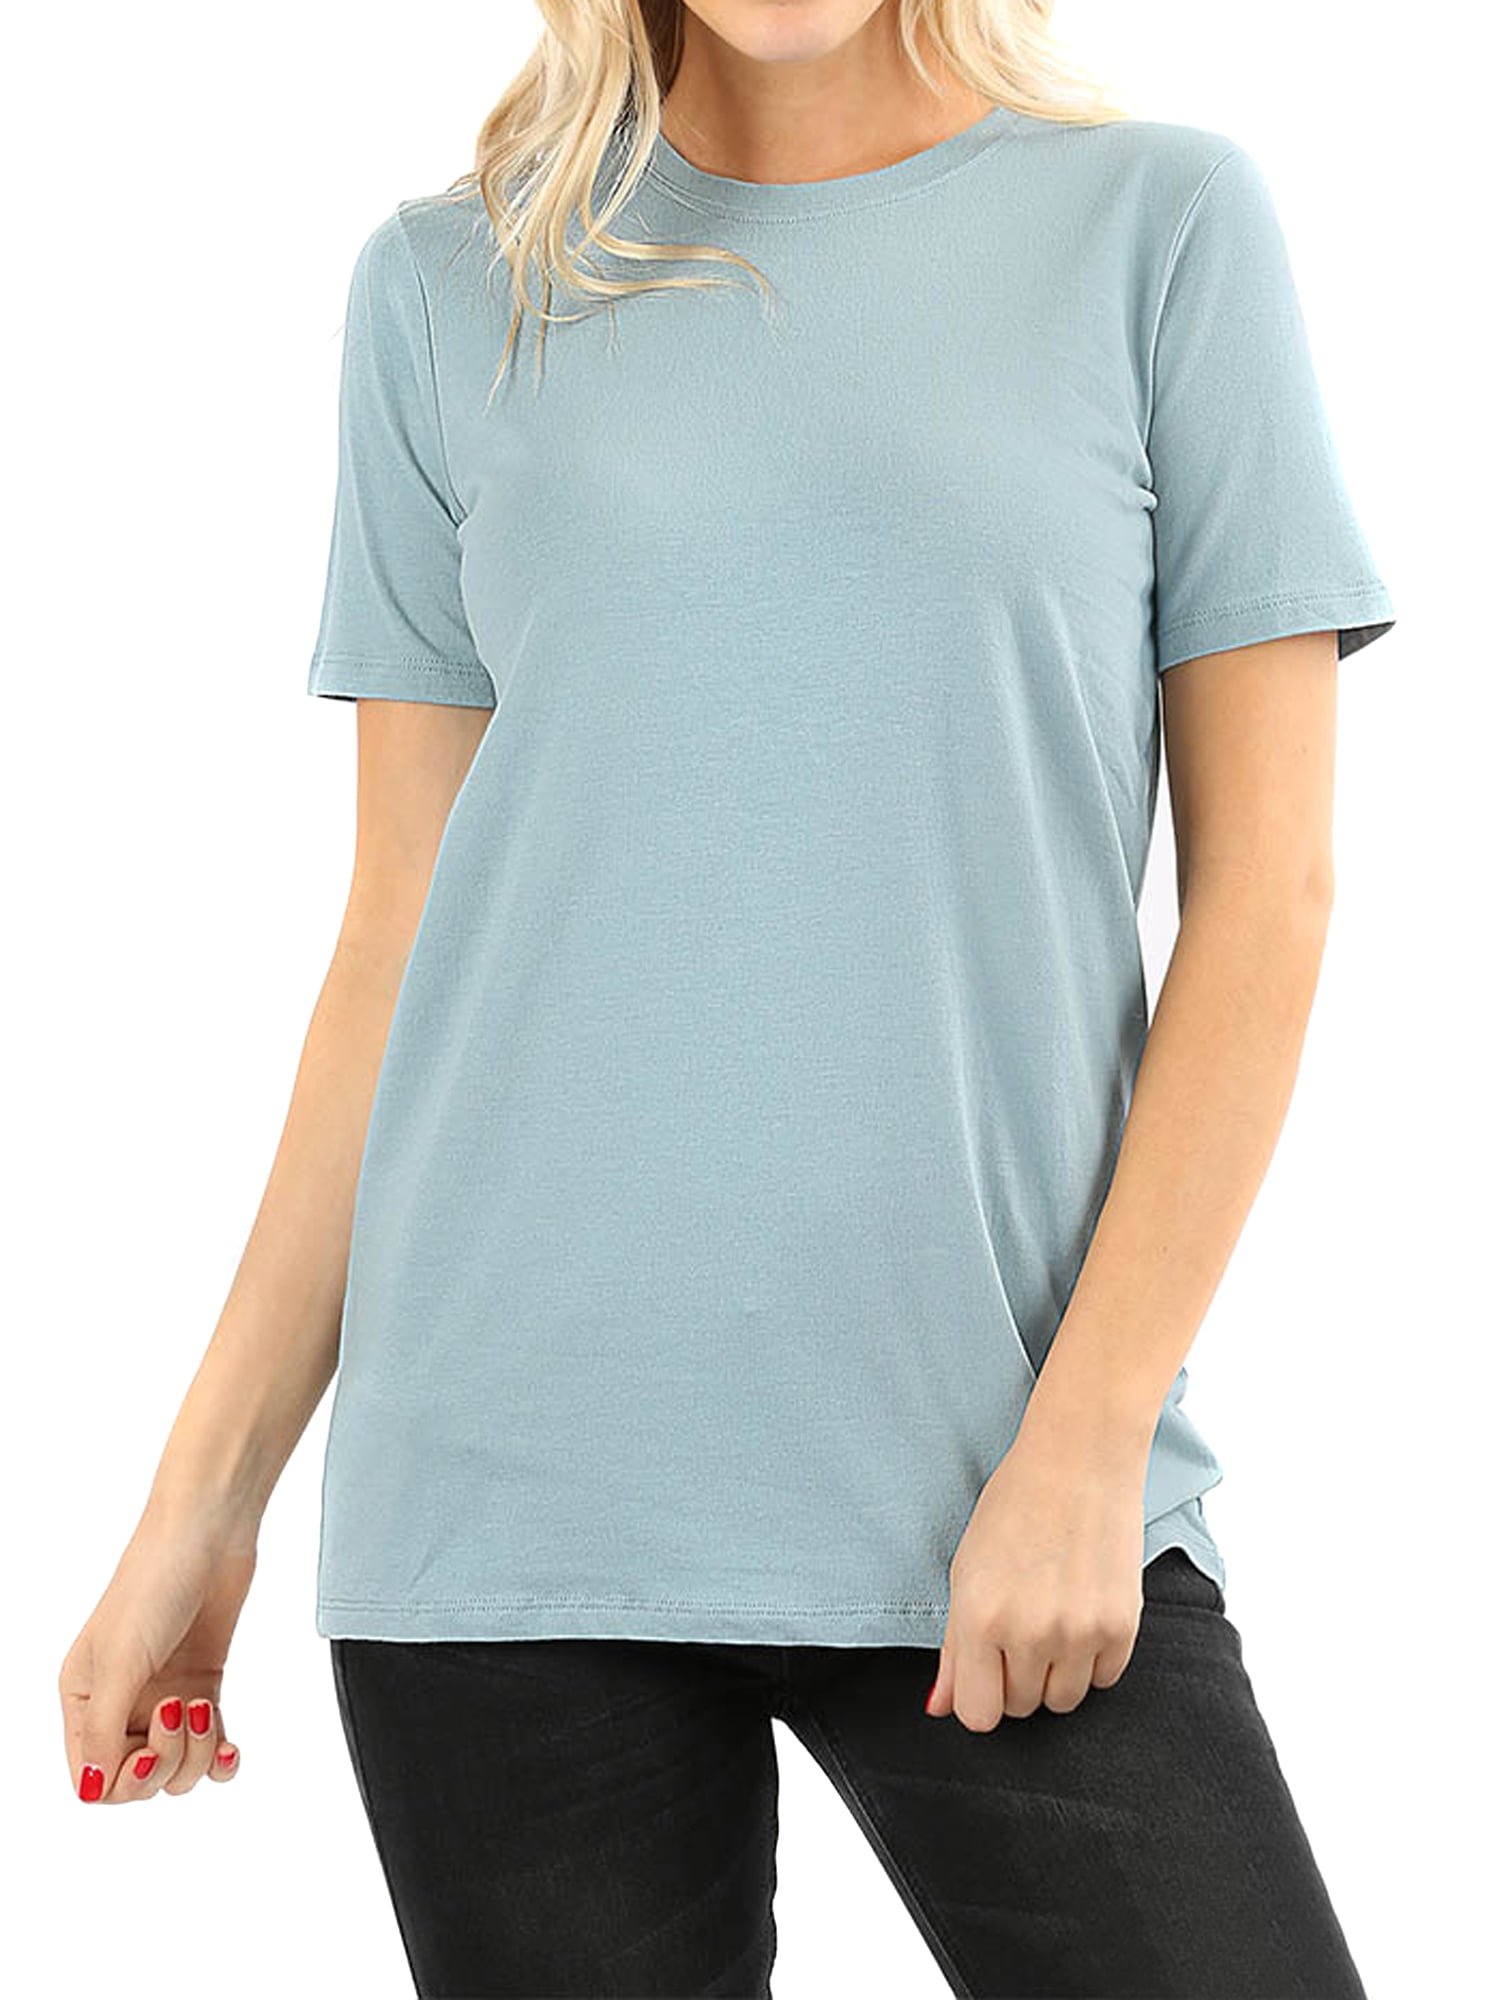 Women's Cotton Crew Neck Short Sleeve Relaxed Fit Basic Tee Shirts